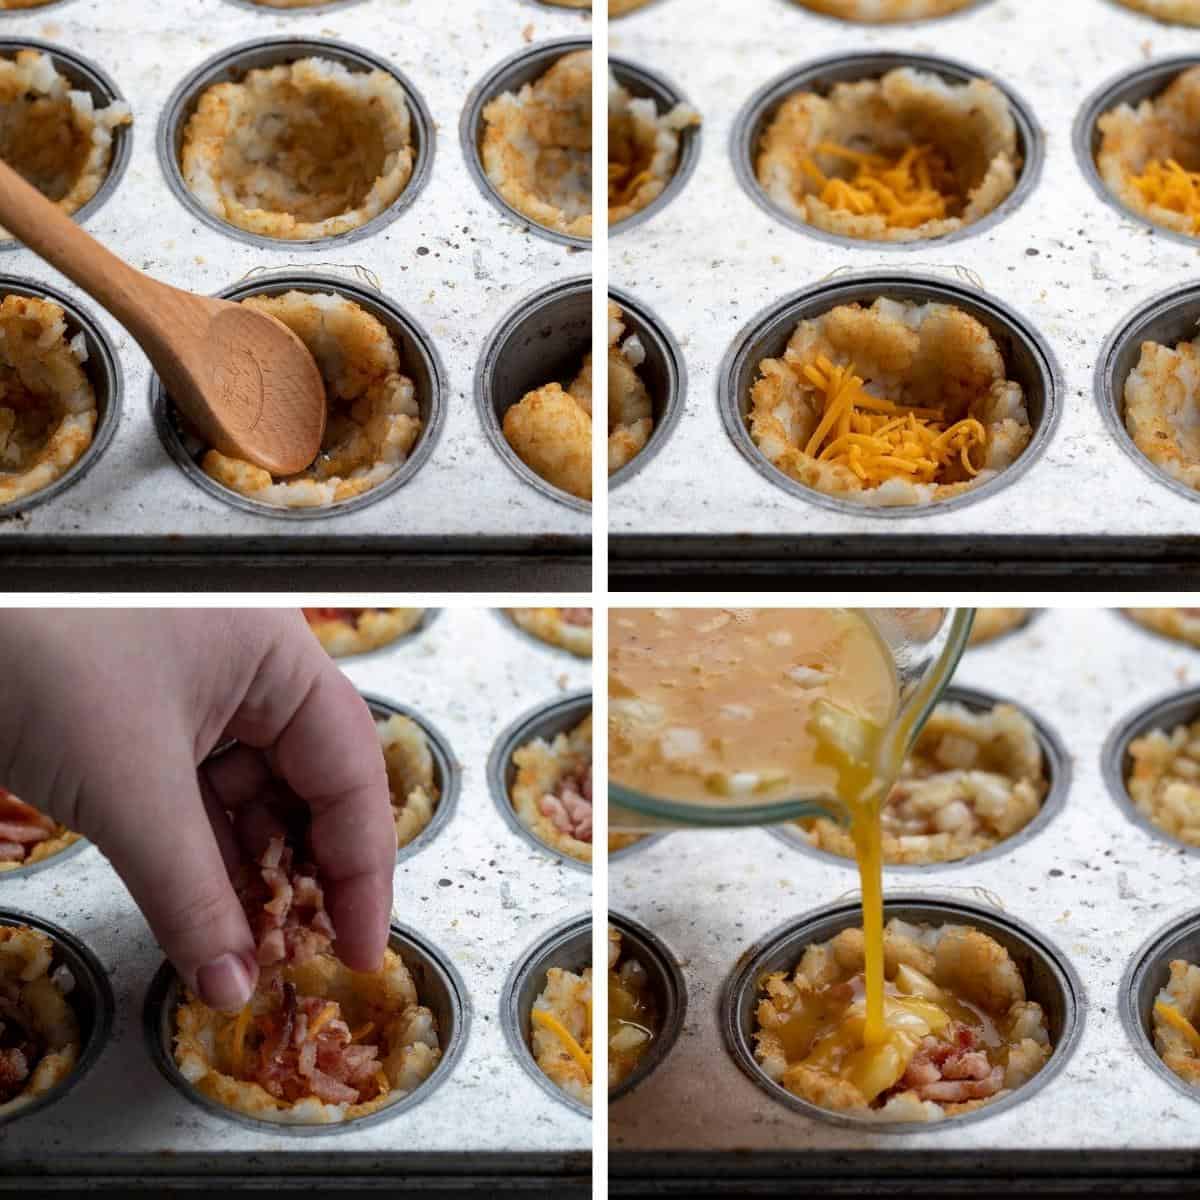 Process steps for adding hashbrowns, cheese, bacon, and egg mixture to muffin cups